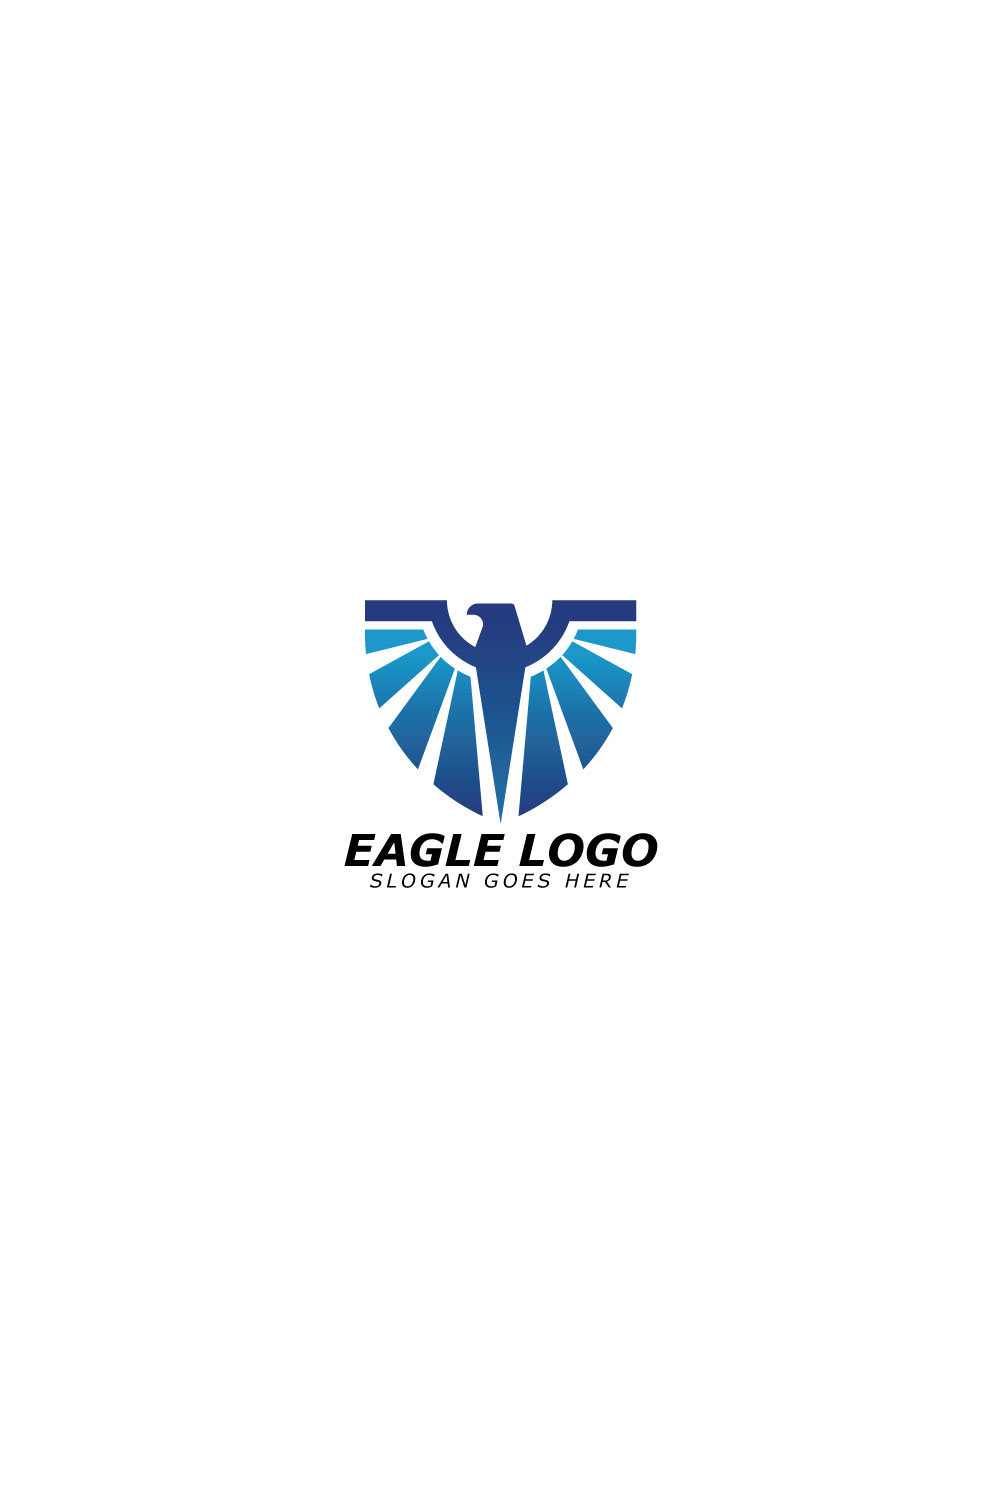 Eagle logo template with a shield design Vector illustration pinterest preview image.